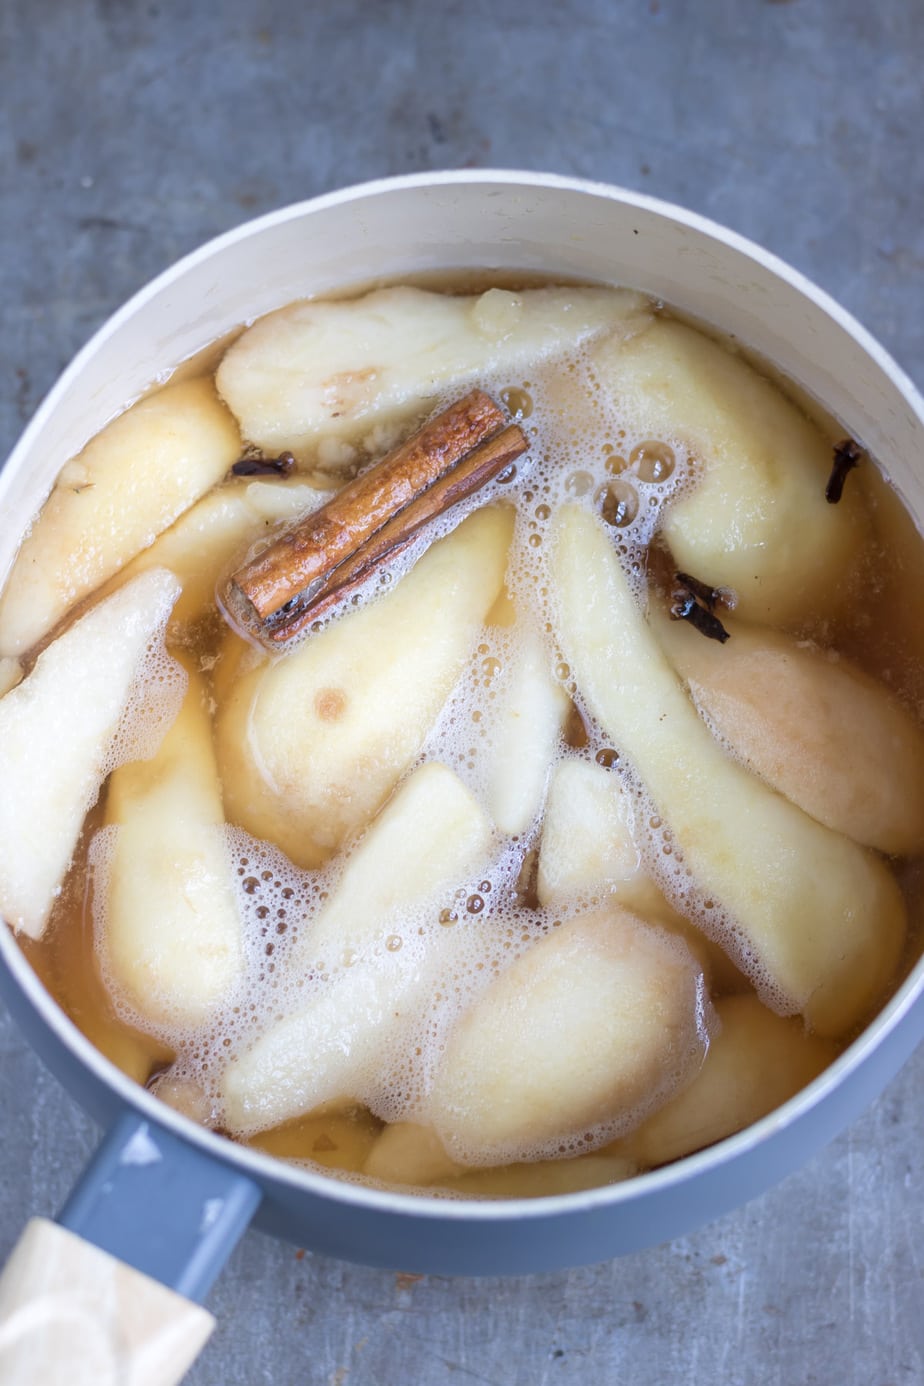 Pot of stewed pears with cinnamon stick and cloves.